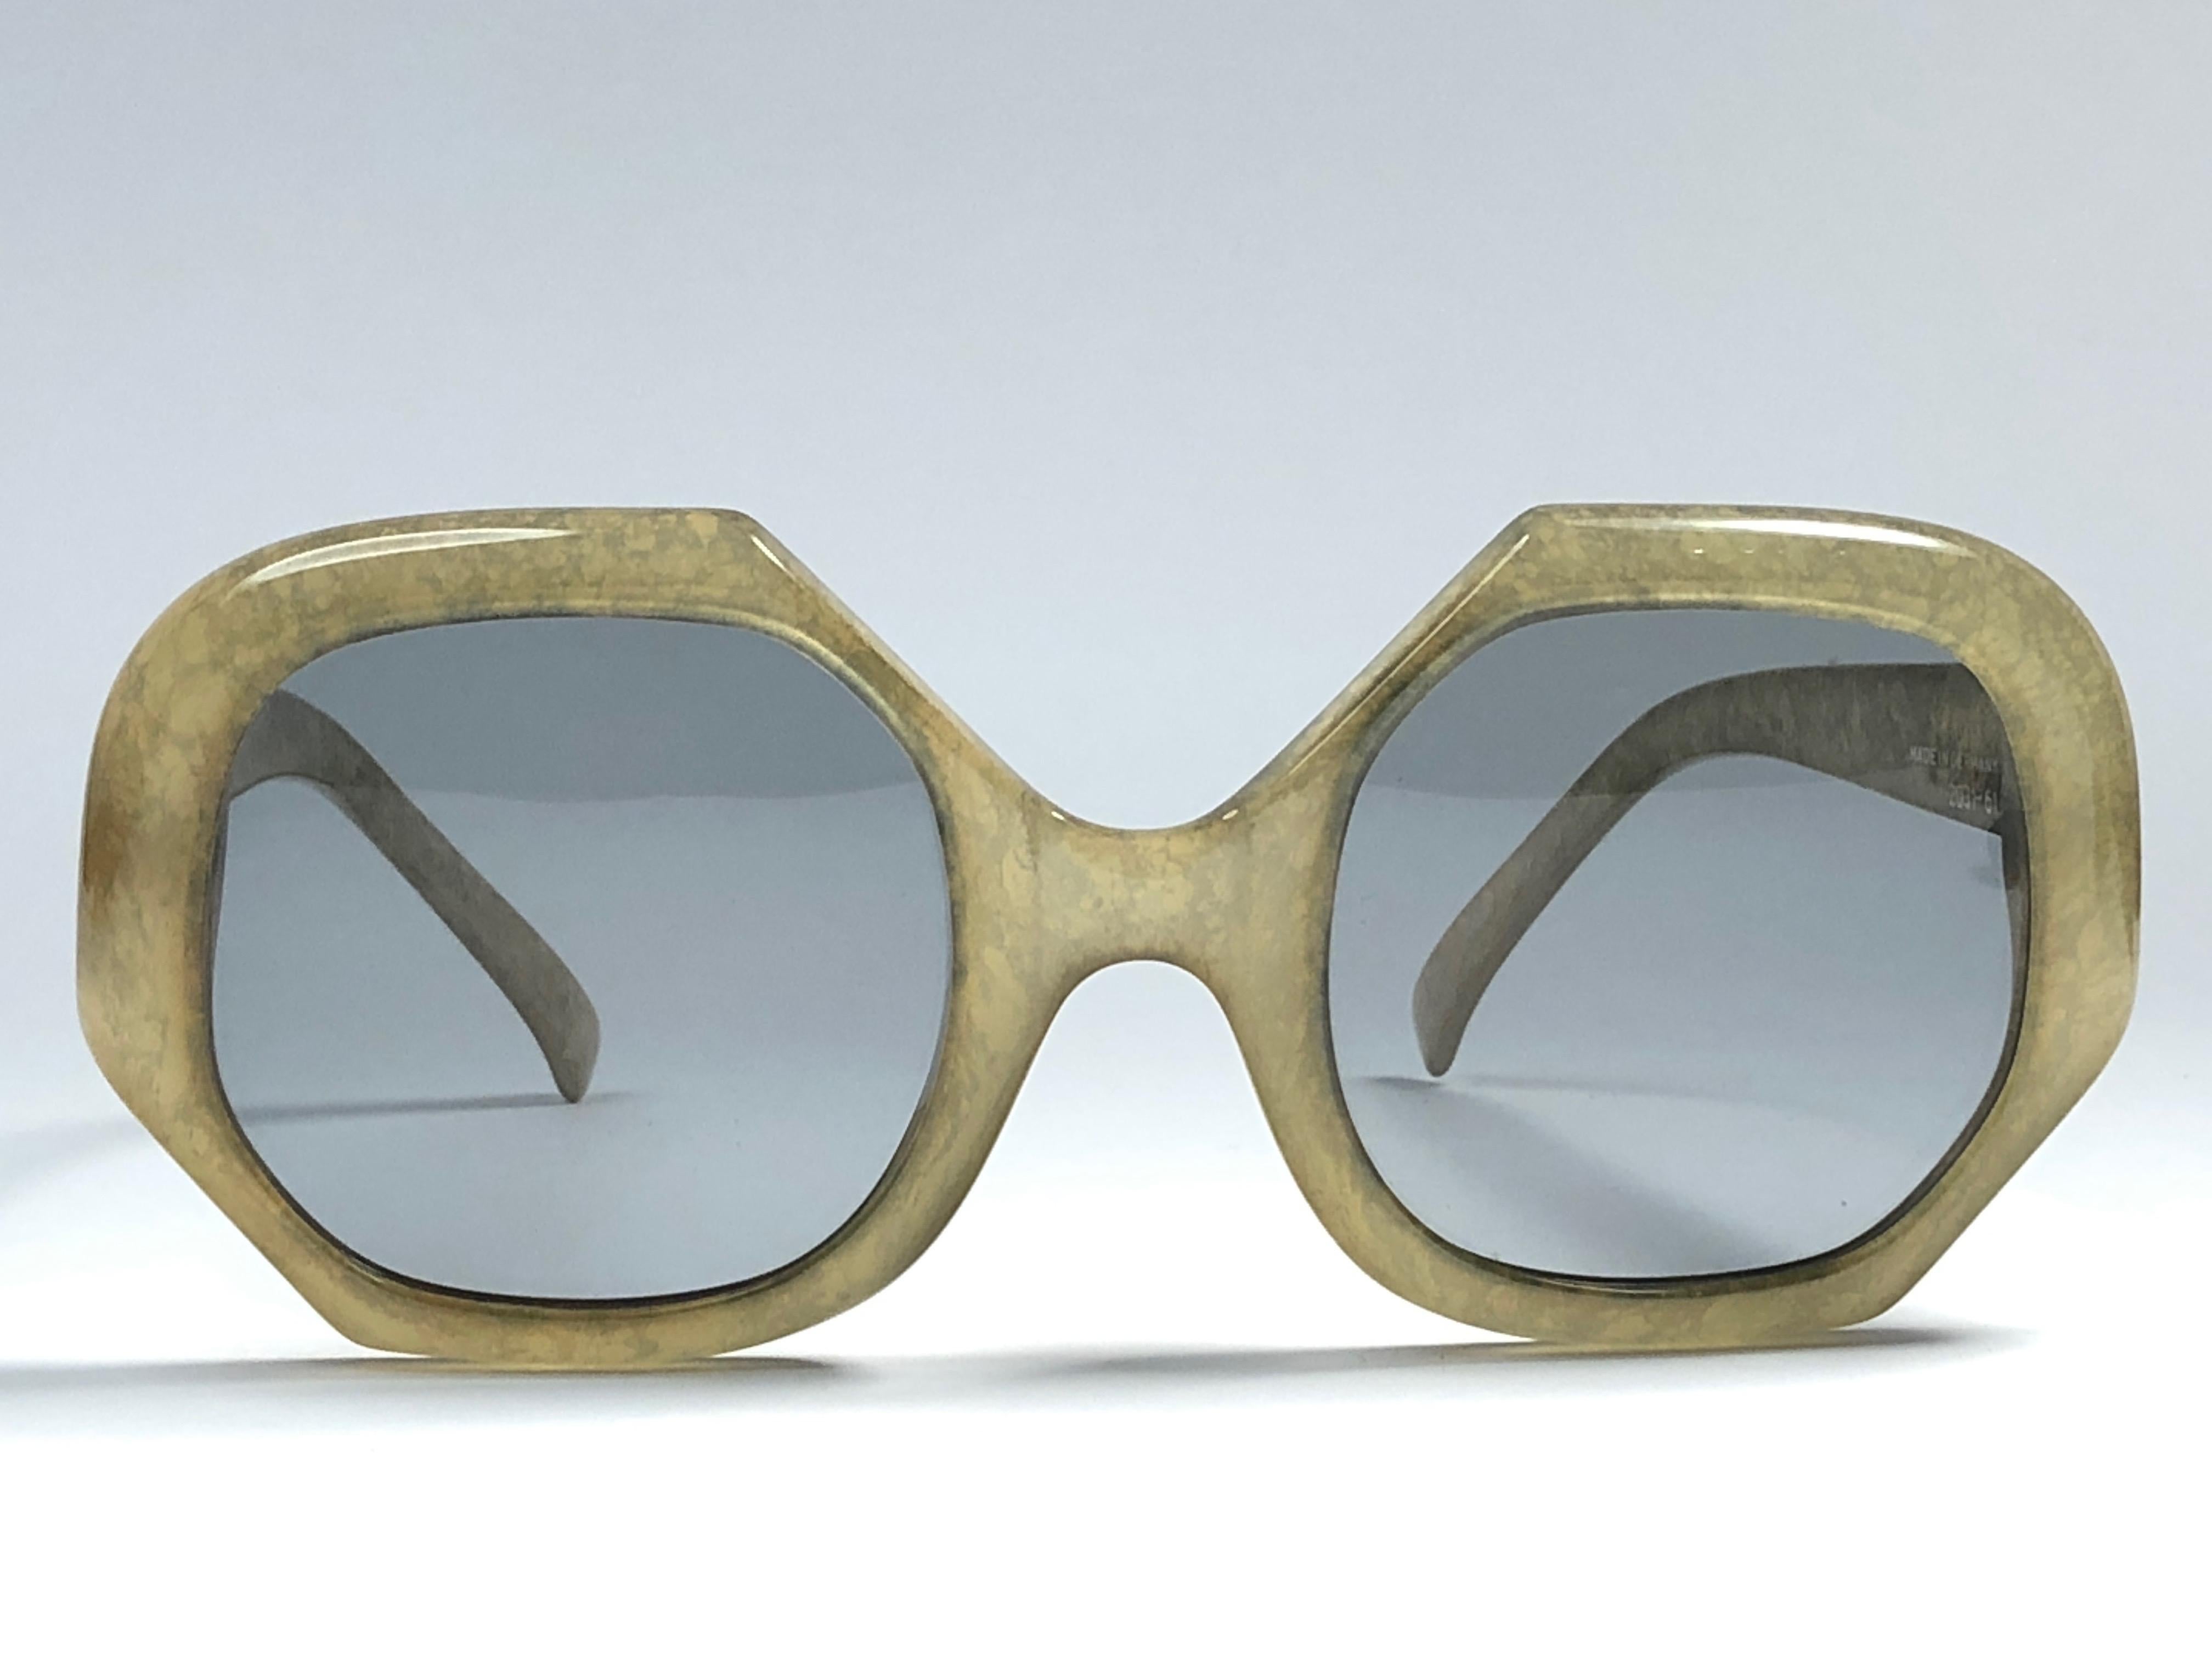 New Vintage Christian Dior 2031 61 Jasped lime green frame with spotless light lenses.   
Made in Germany.  Produced and design in 1970's.  
A collector’s piece!  New, never worn or displayed. 
Comes with its original silver Christian Dior Lunettes